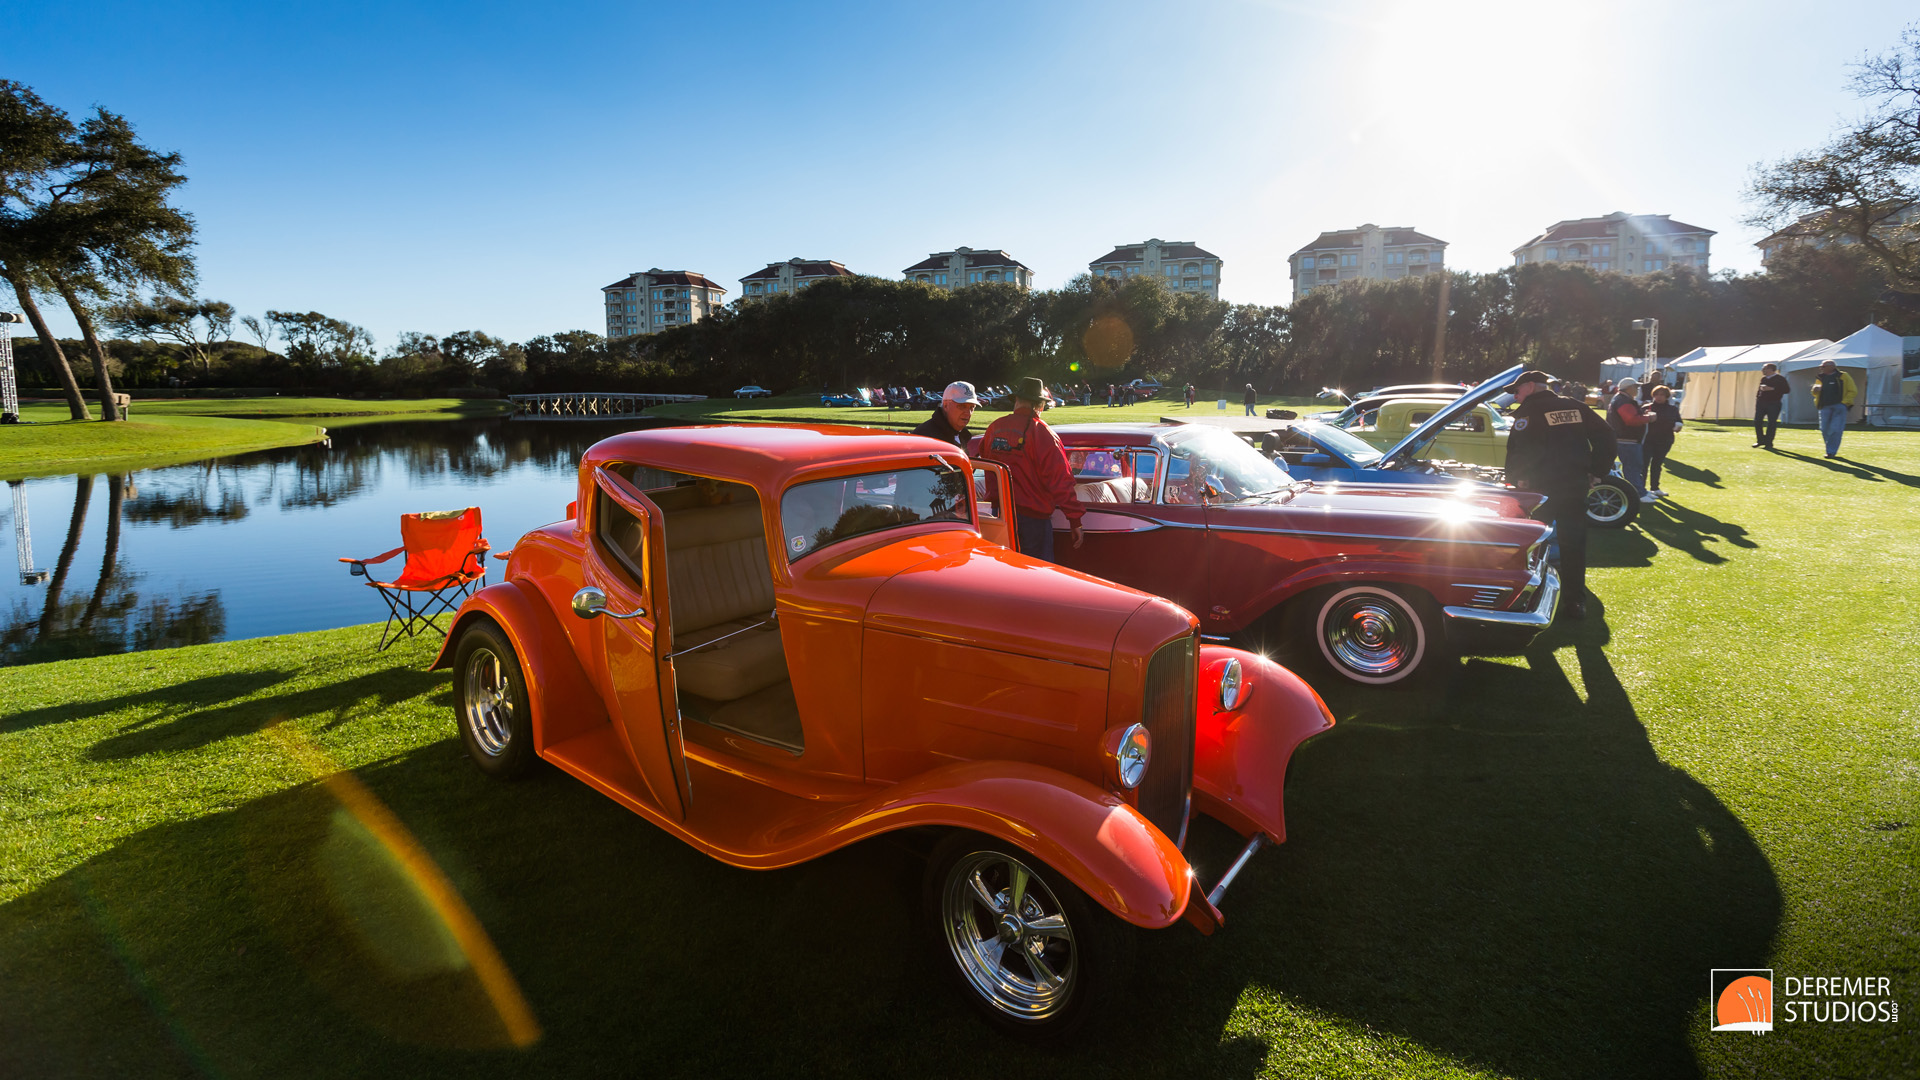 2014 03 Amelia Concours Day 2 - 02 Ford Hotrod Cars and Coffee